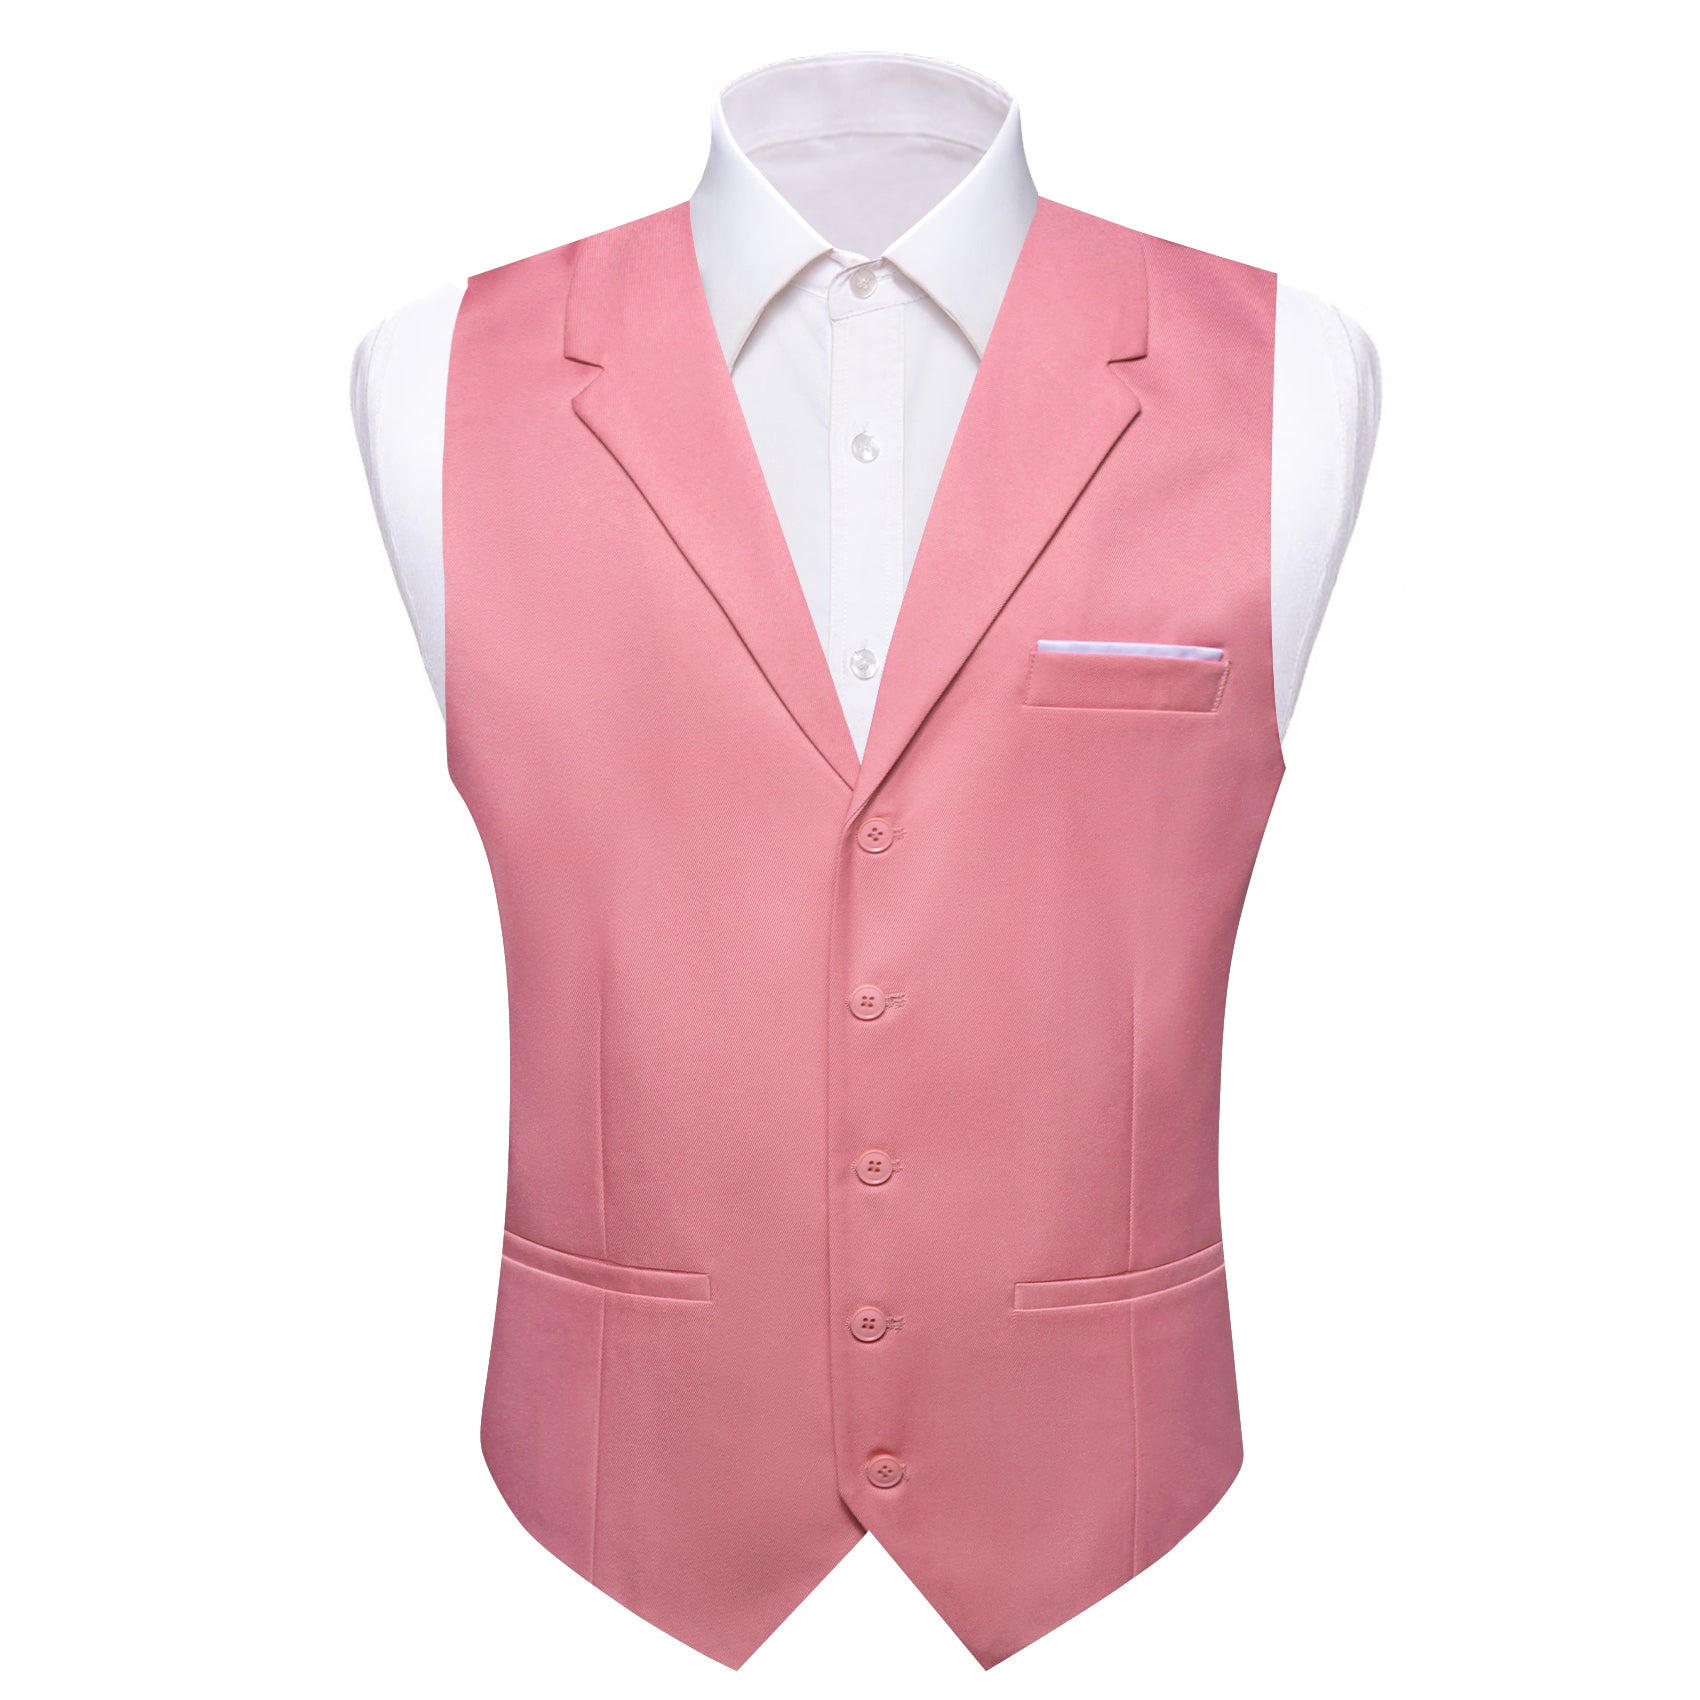 Barry.wang Pale Red Solid Vest Waistcoat Set